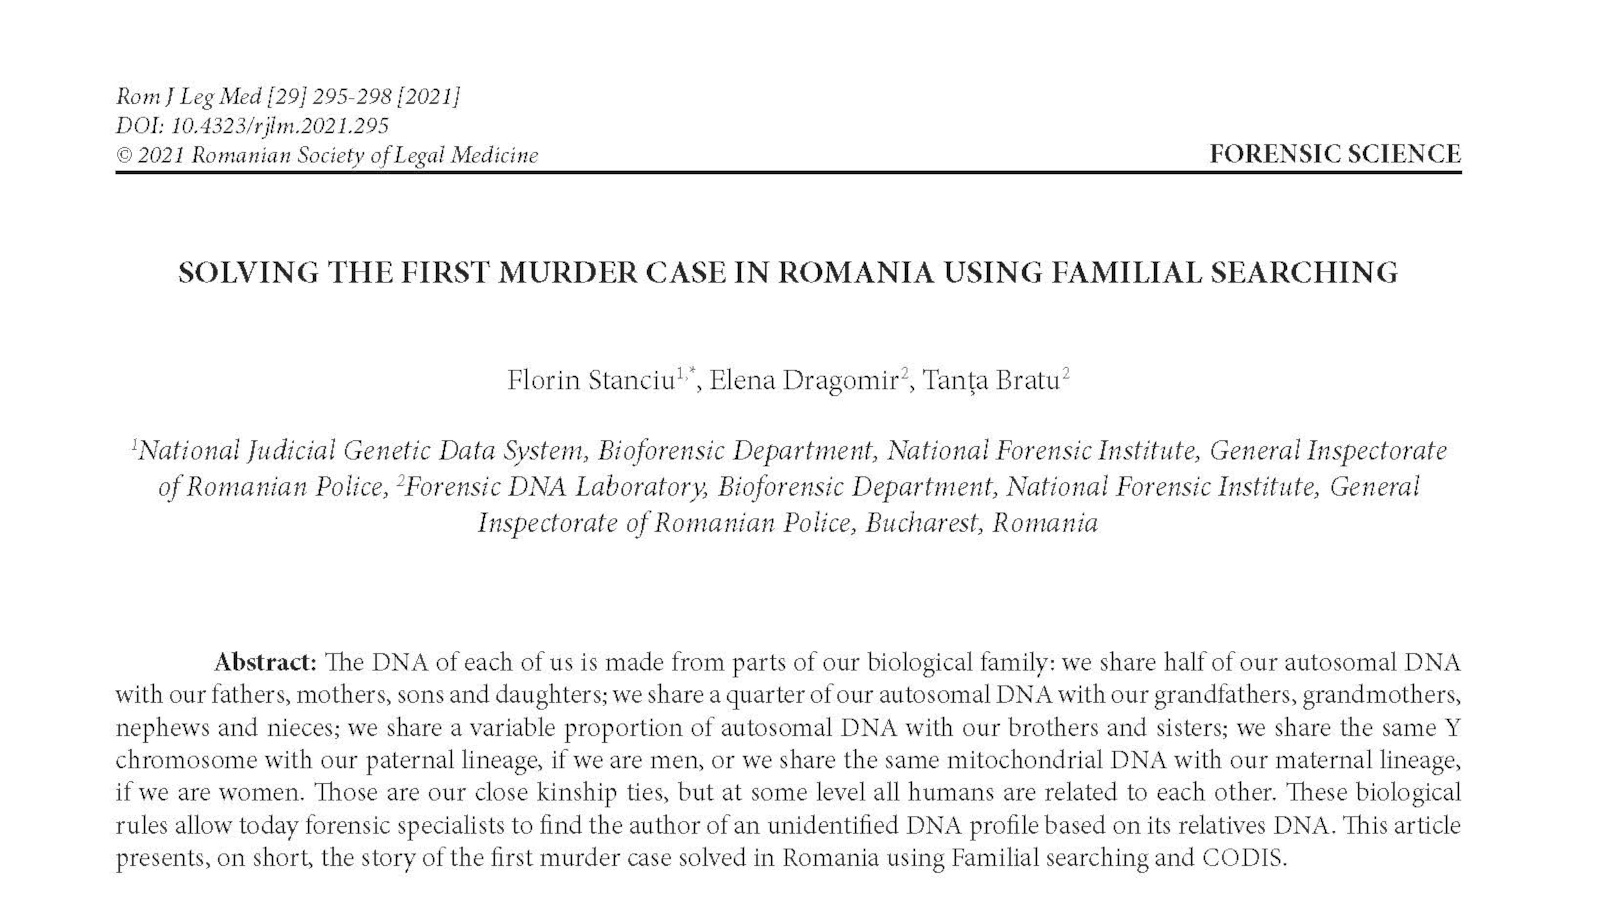 Solving the first murder case in Romania using Familial Searching